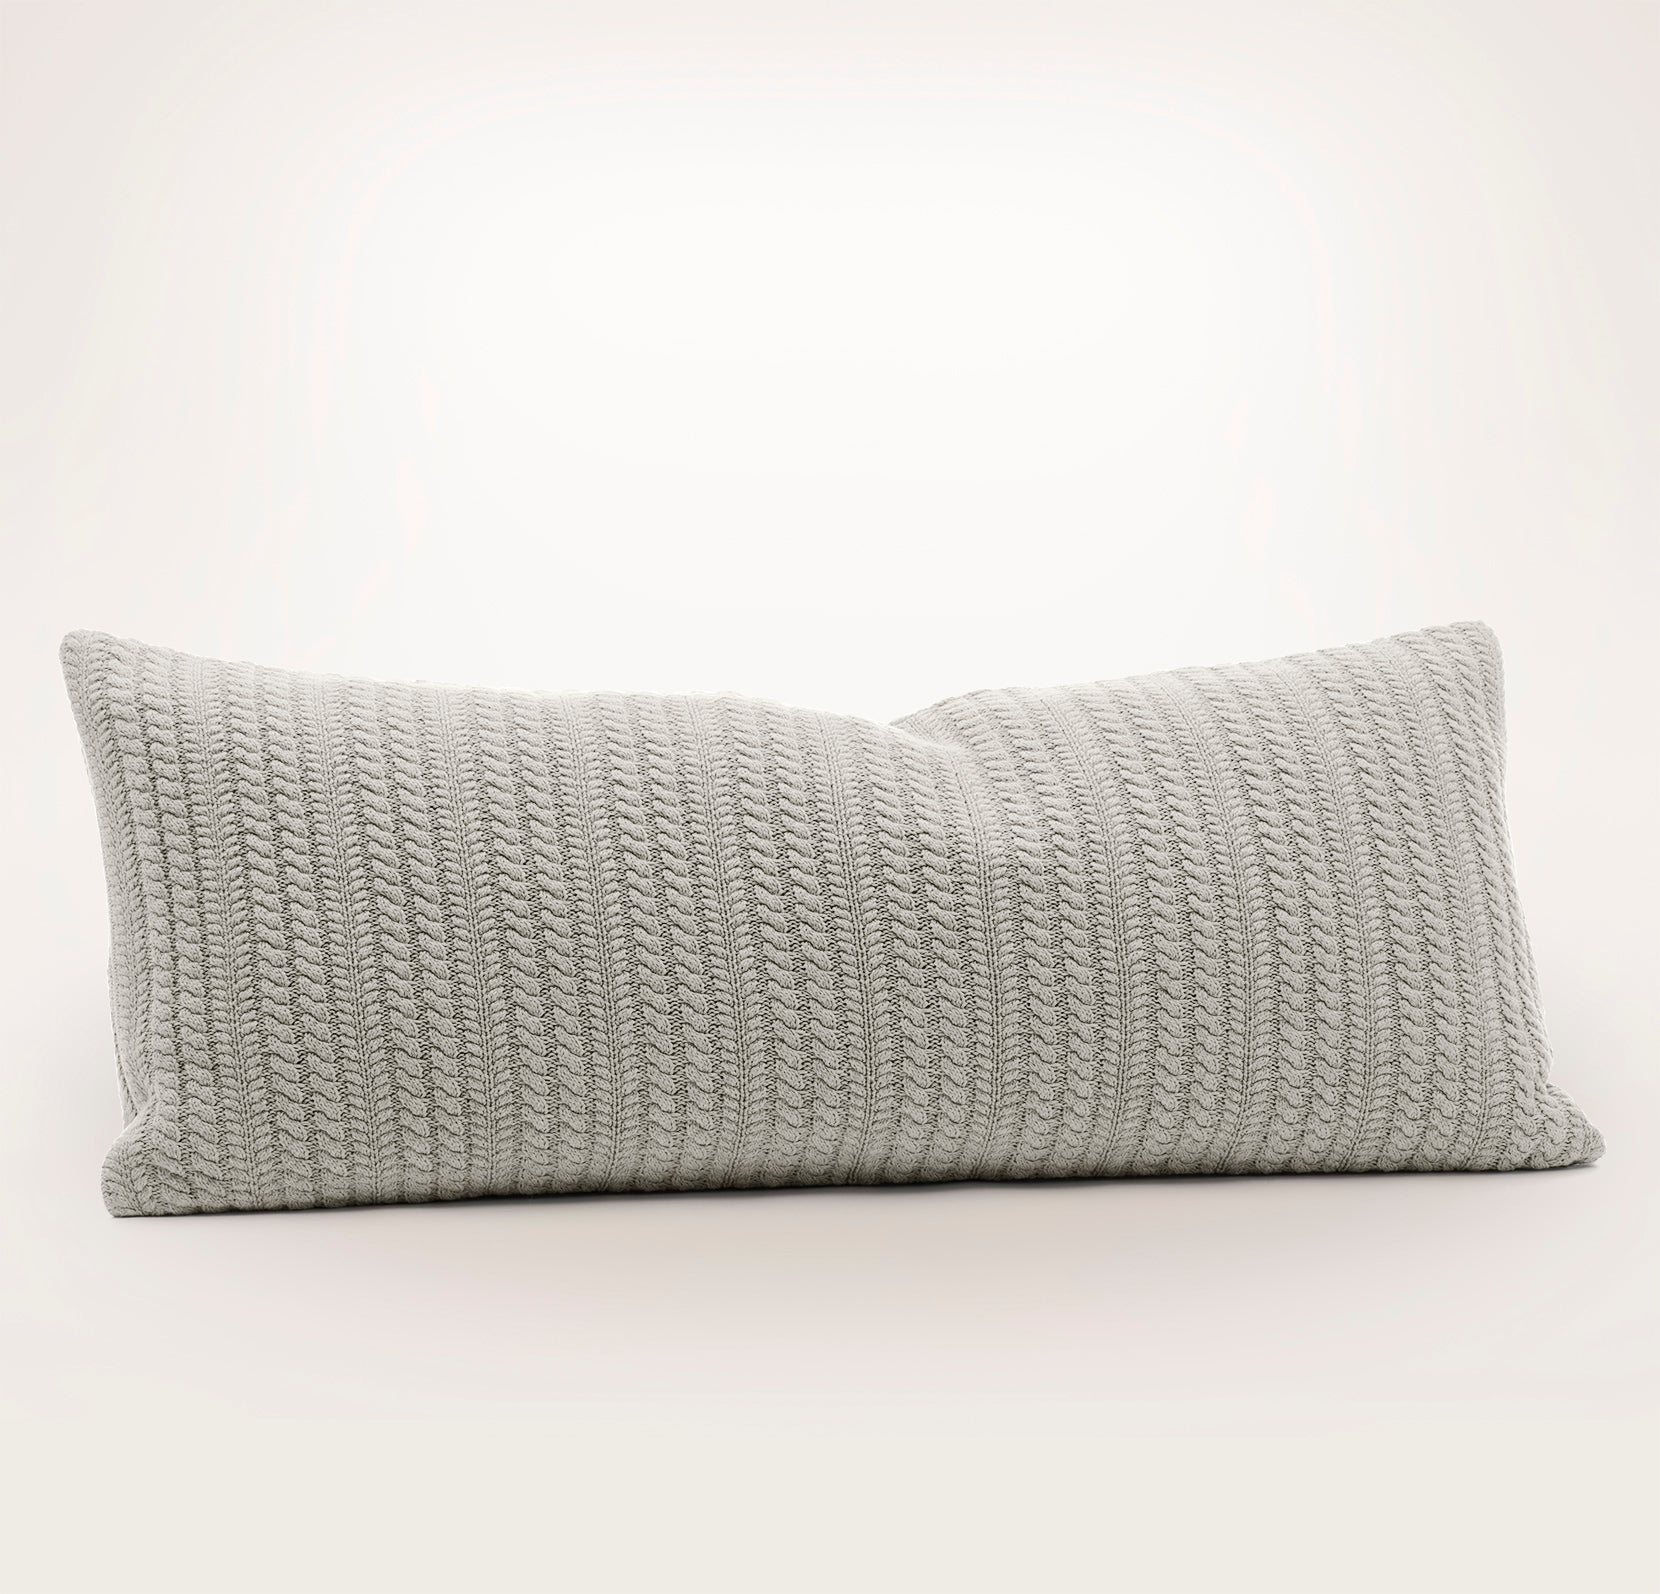 Branch Knit Pillow Cover in Heathered Pewter